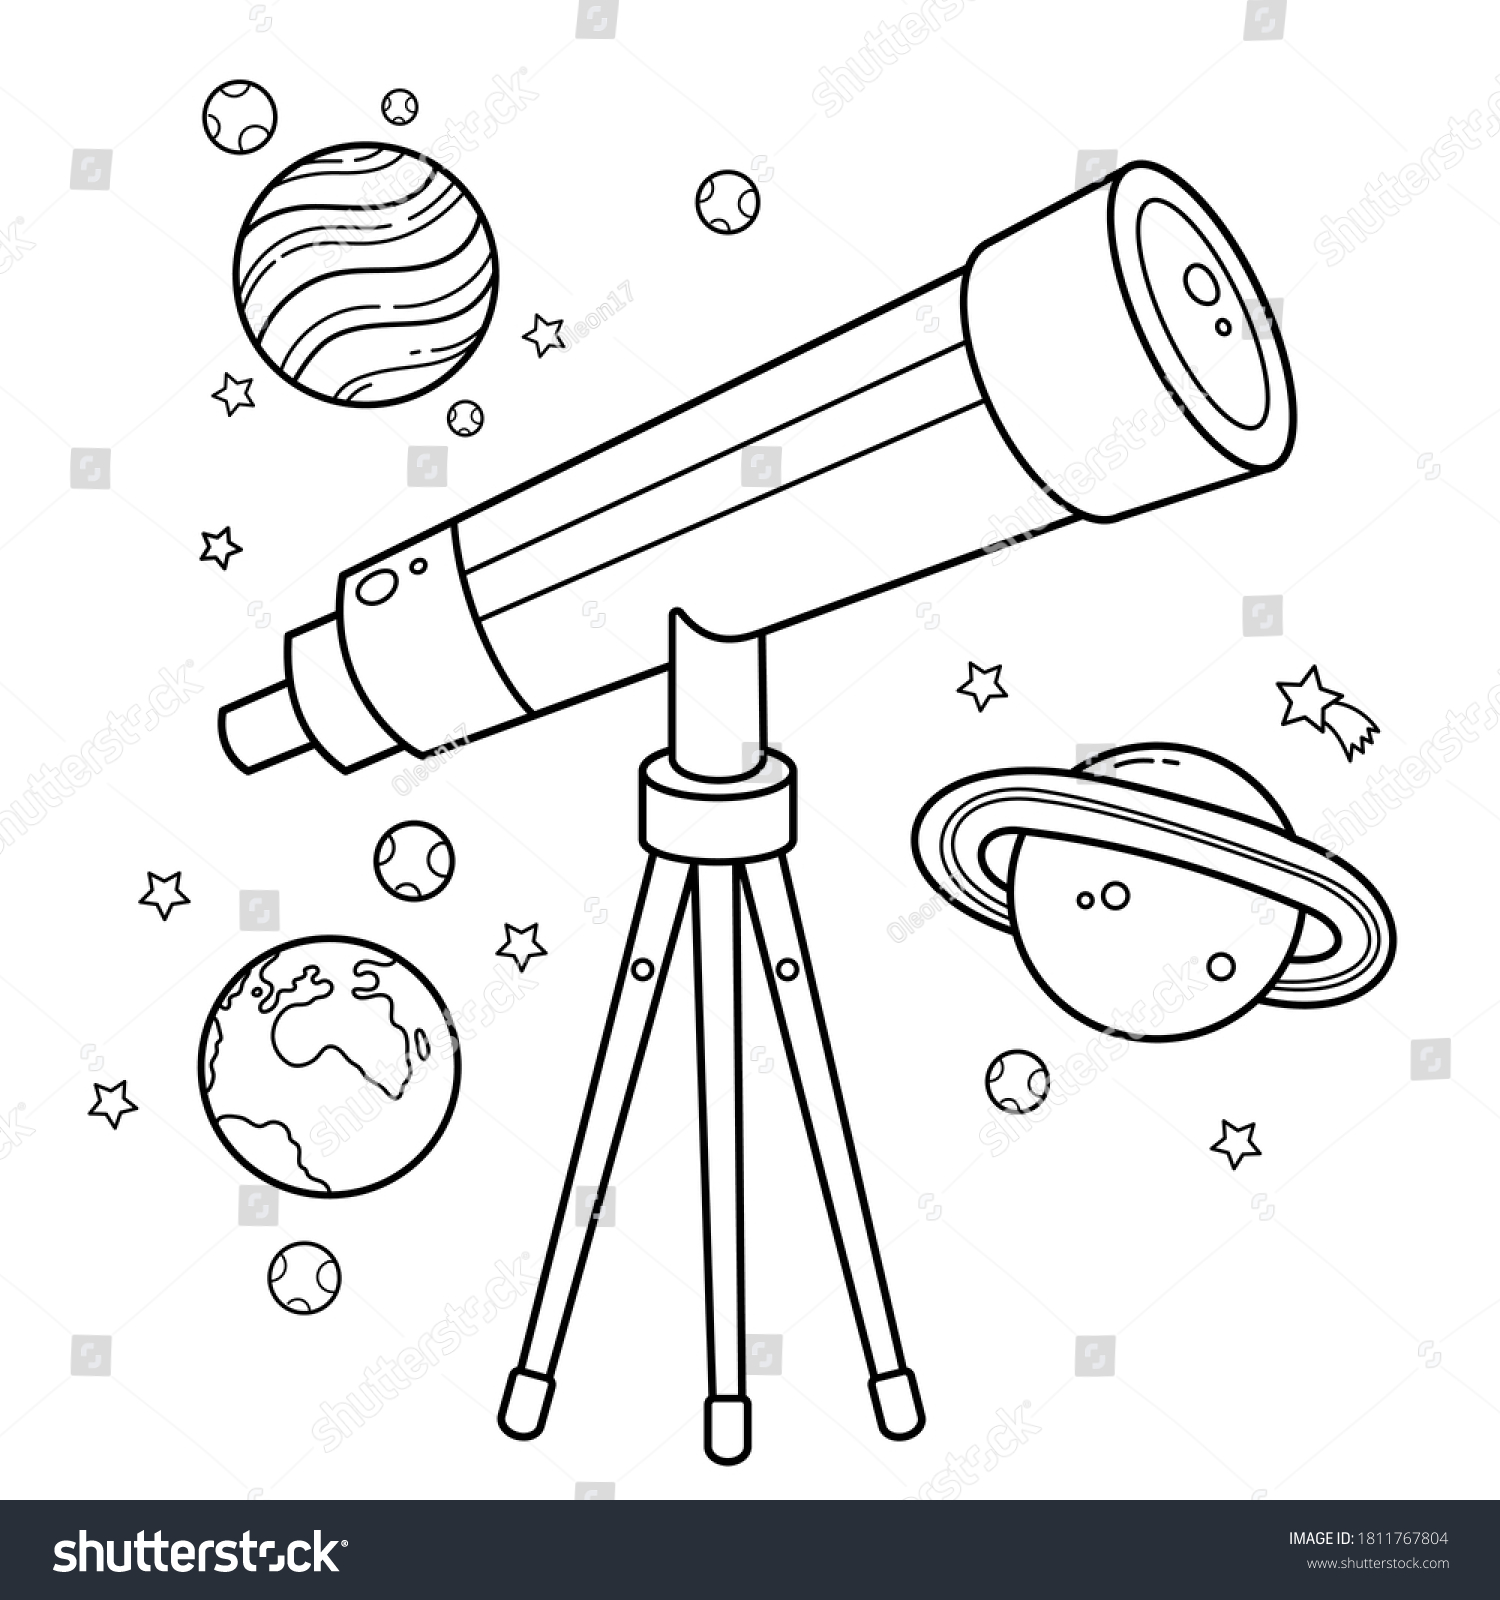 Coloring page outline cartoon telescope stars stock vector royalty free